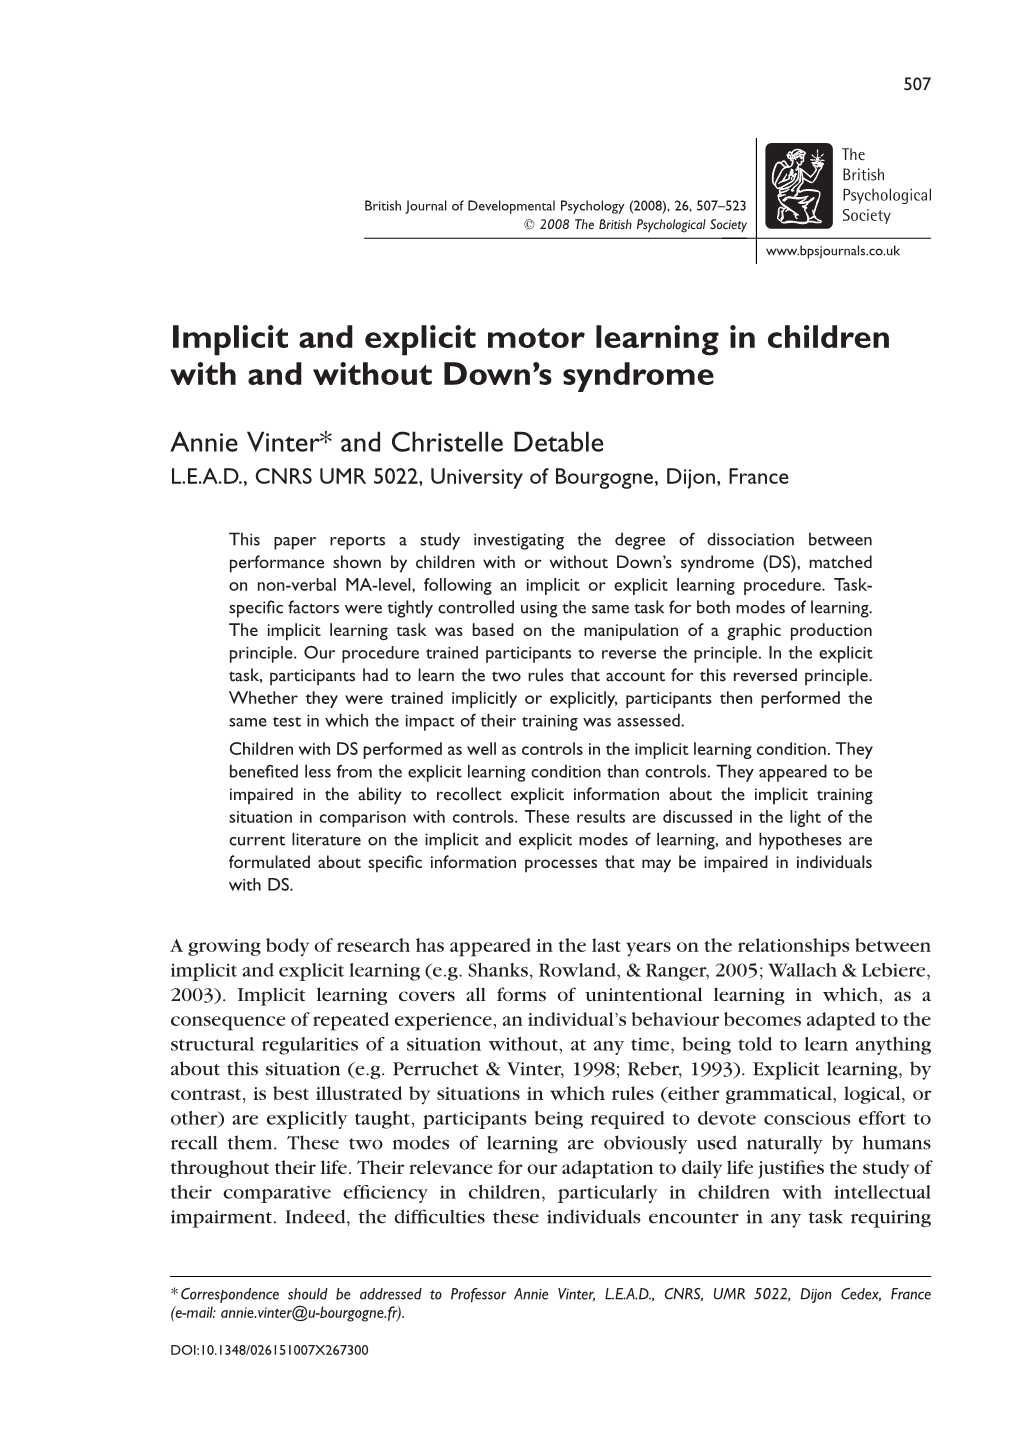 Implicit and Explicit Motor Learning in Children with and Without Down's